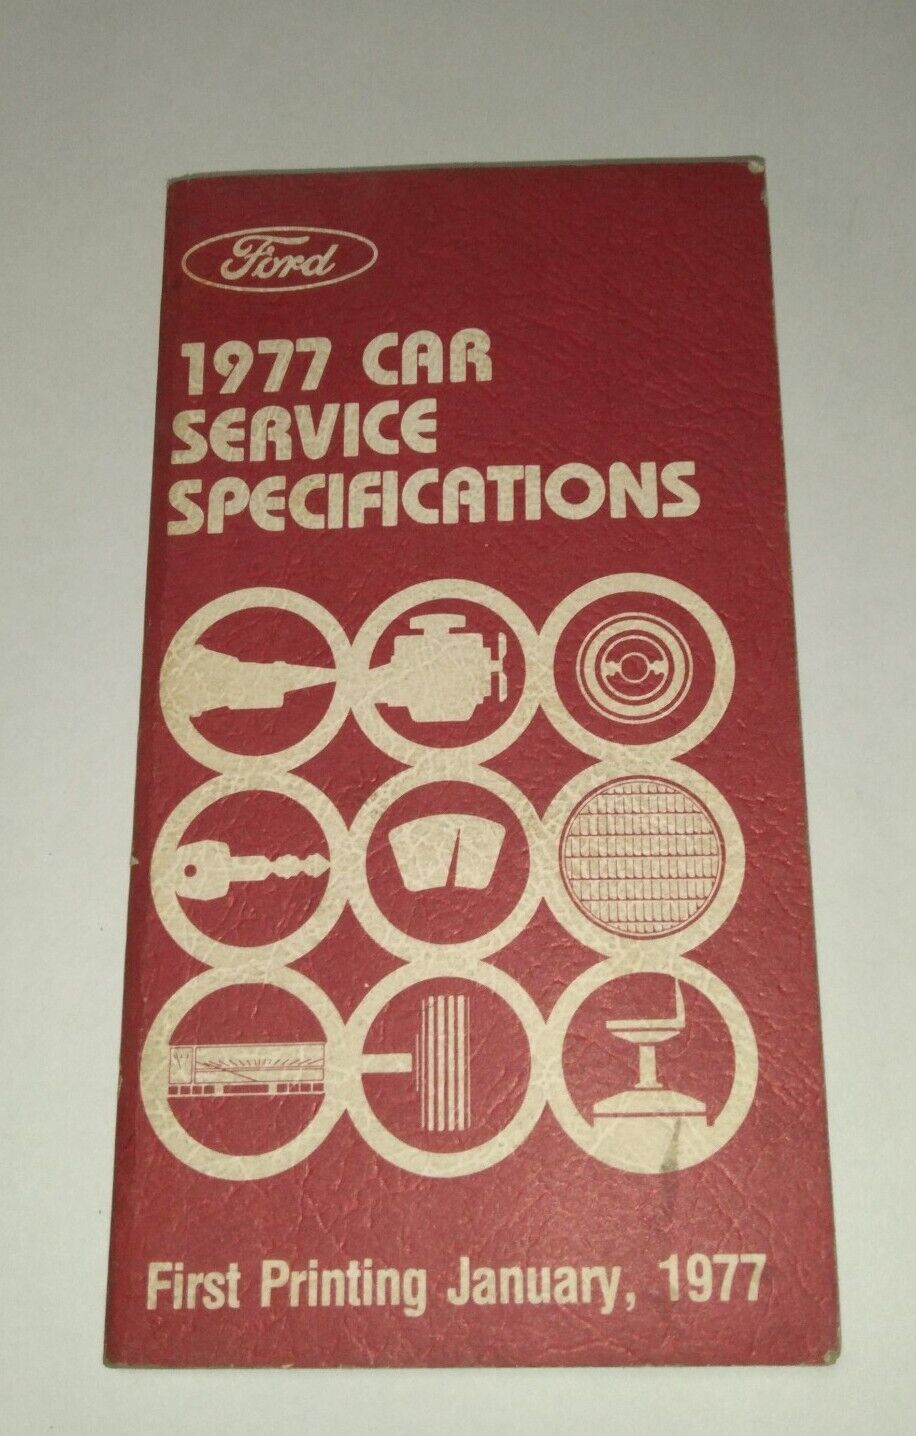 Vintage 1977 Ford Car Performance Specifications Booklet